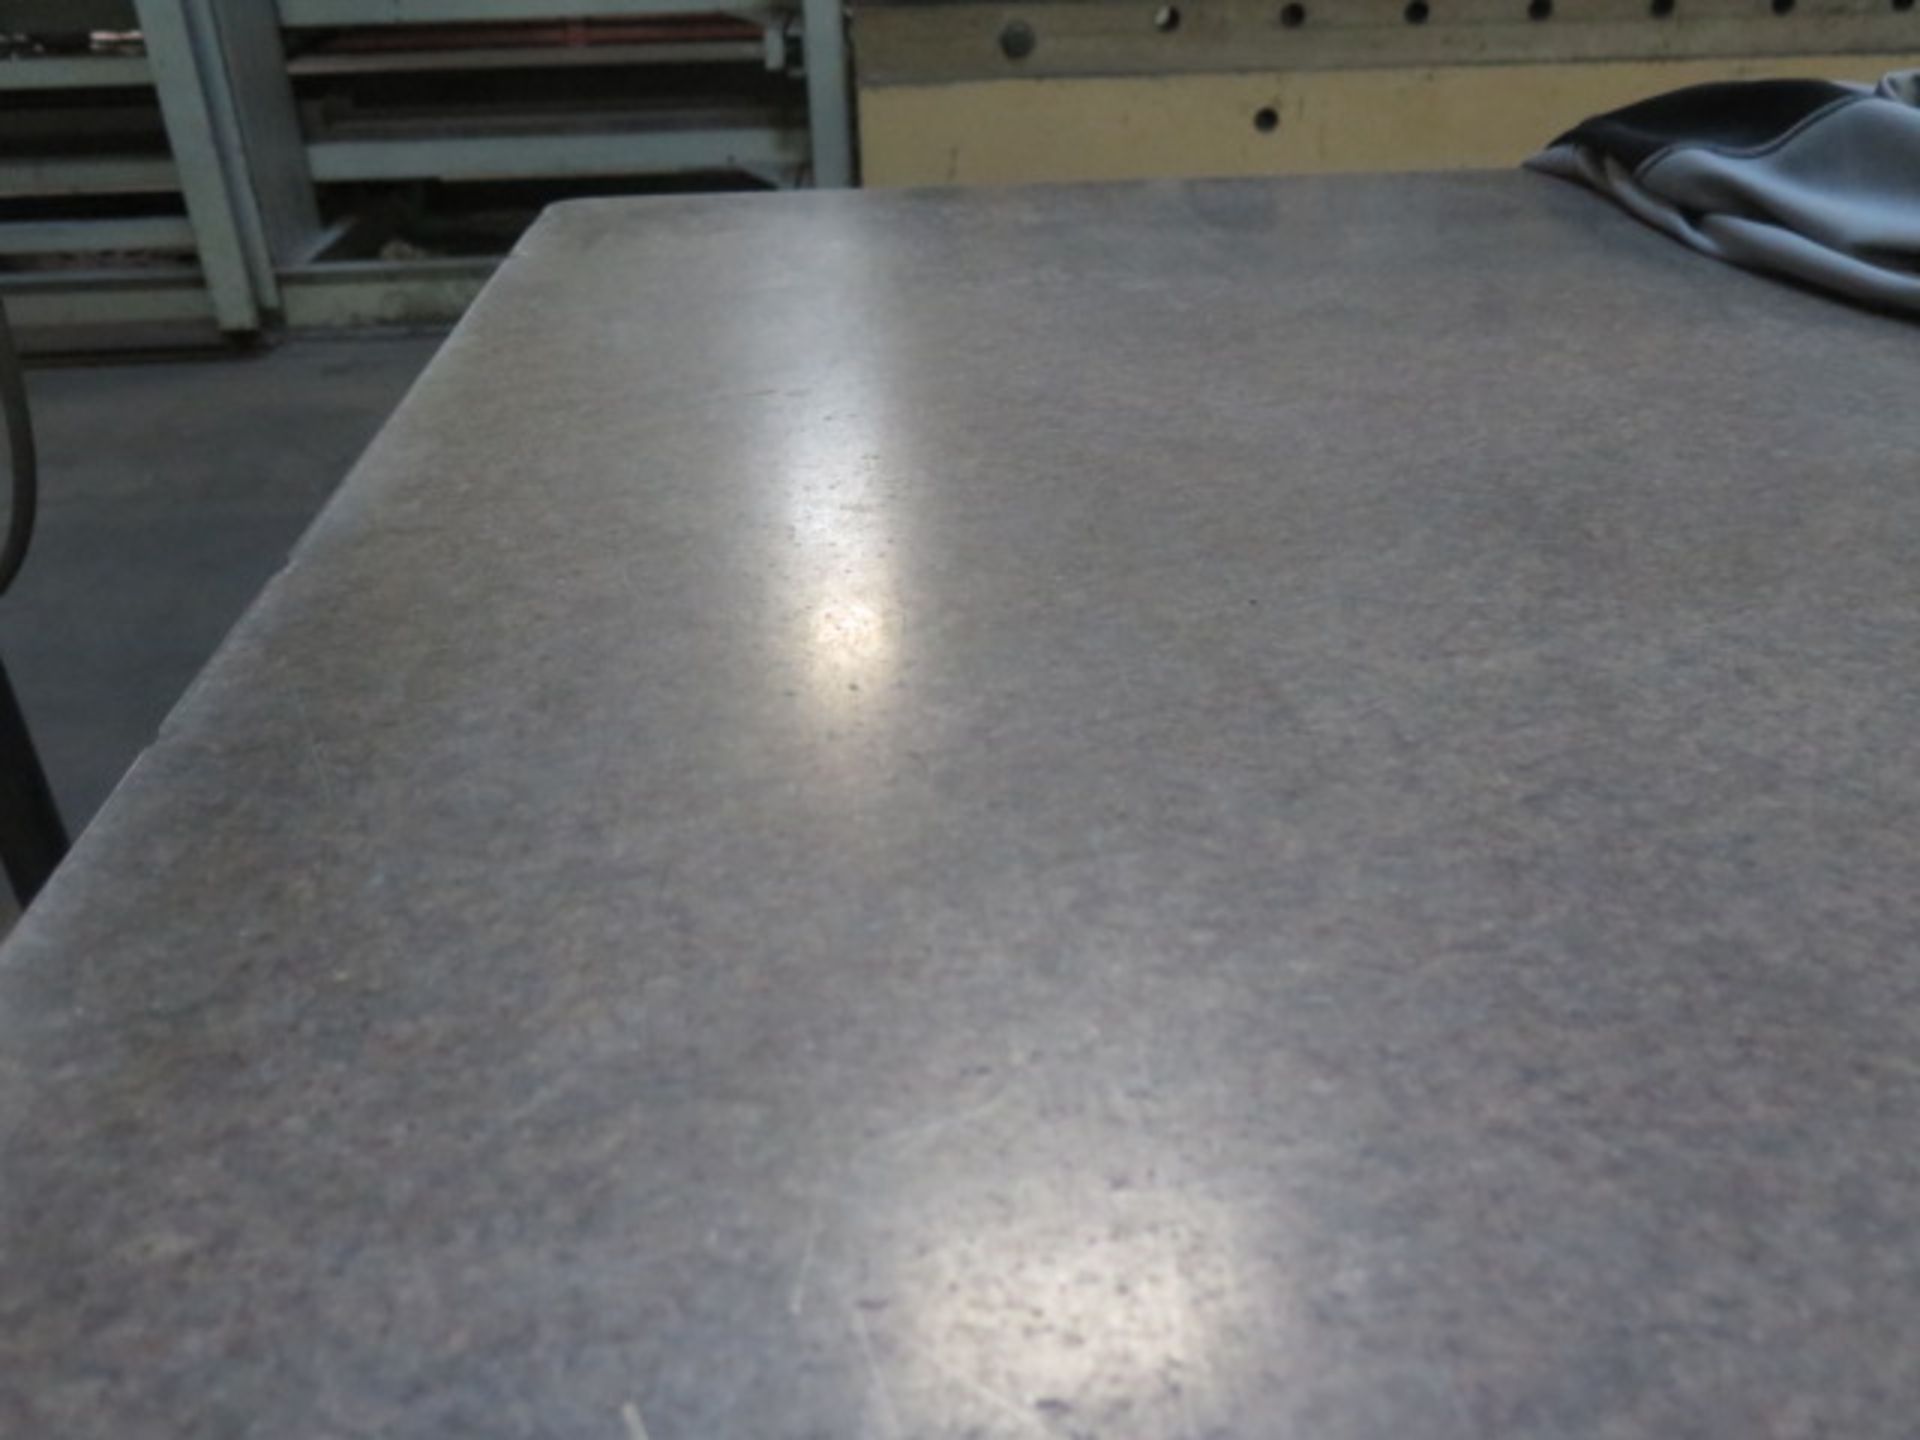 48" x 60" x 10" 4-Ledge Granite Surface Plate w/ Stand (SOLD AS-IS - NO WARRANTY) - Image 3 of 3